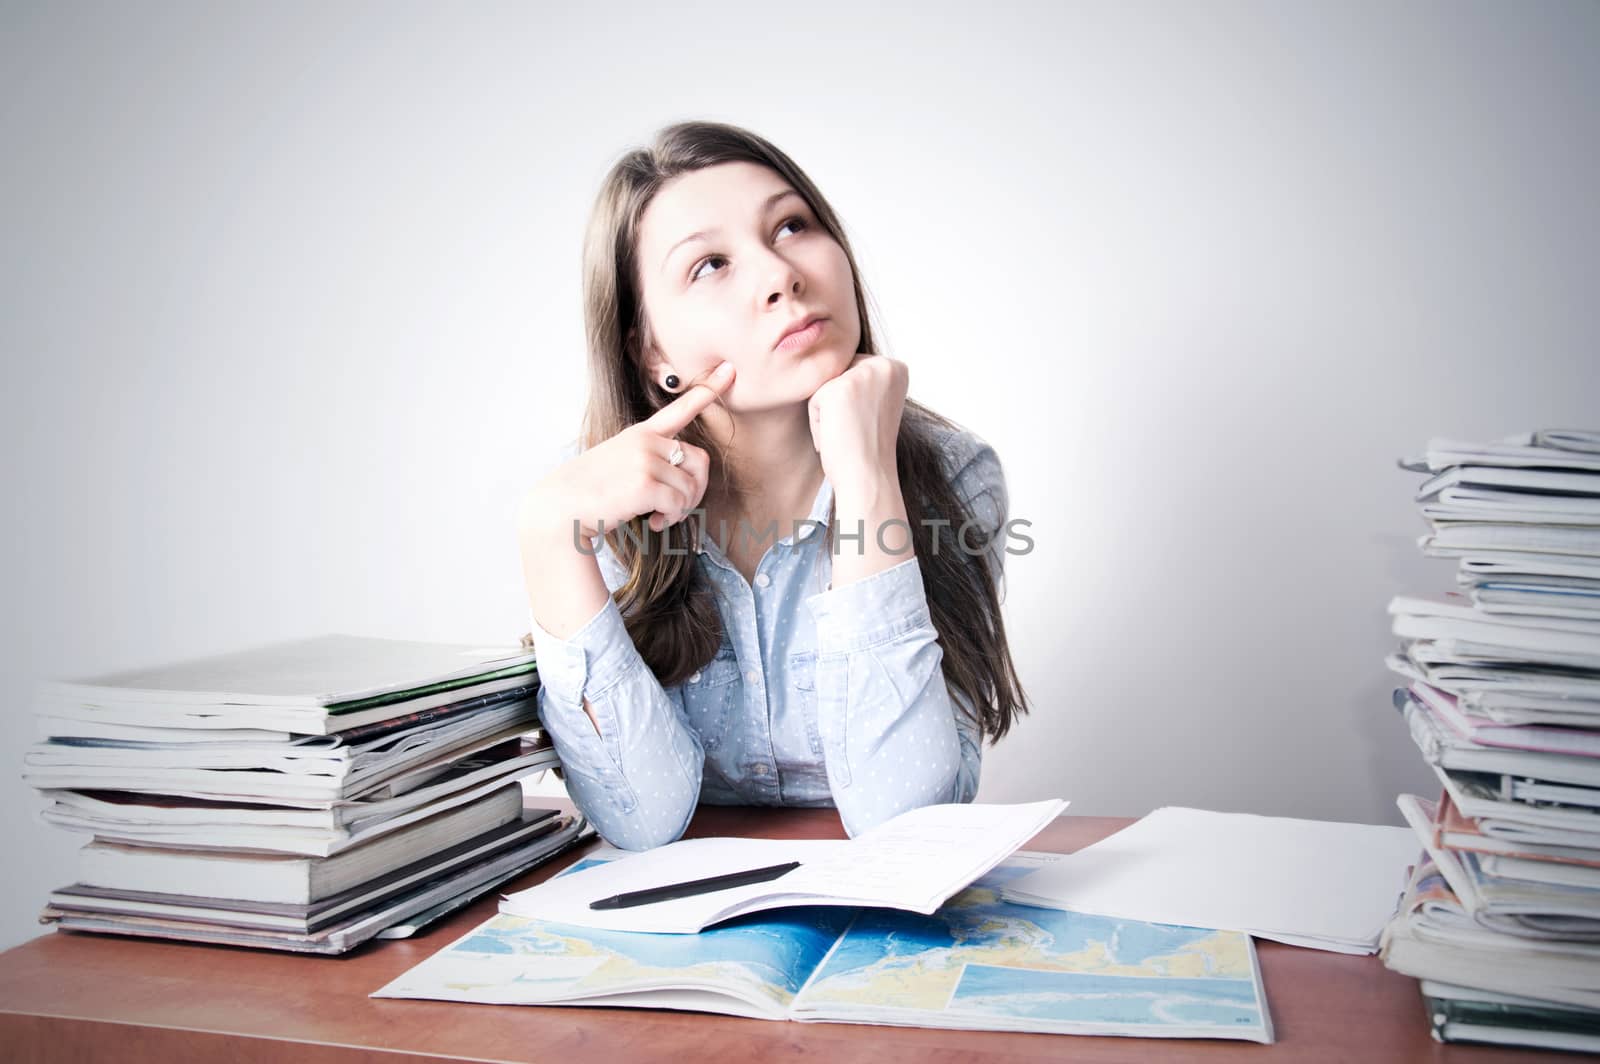 Cute smart young girl studying. Education conceptual image.